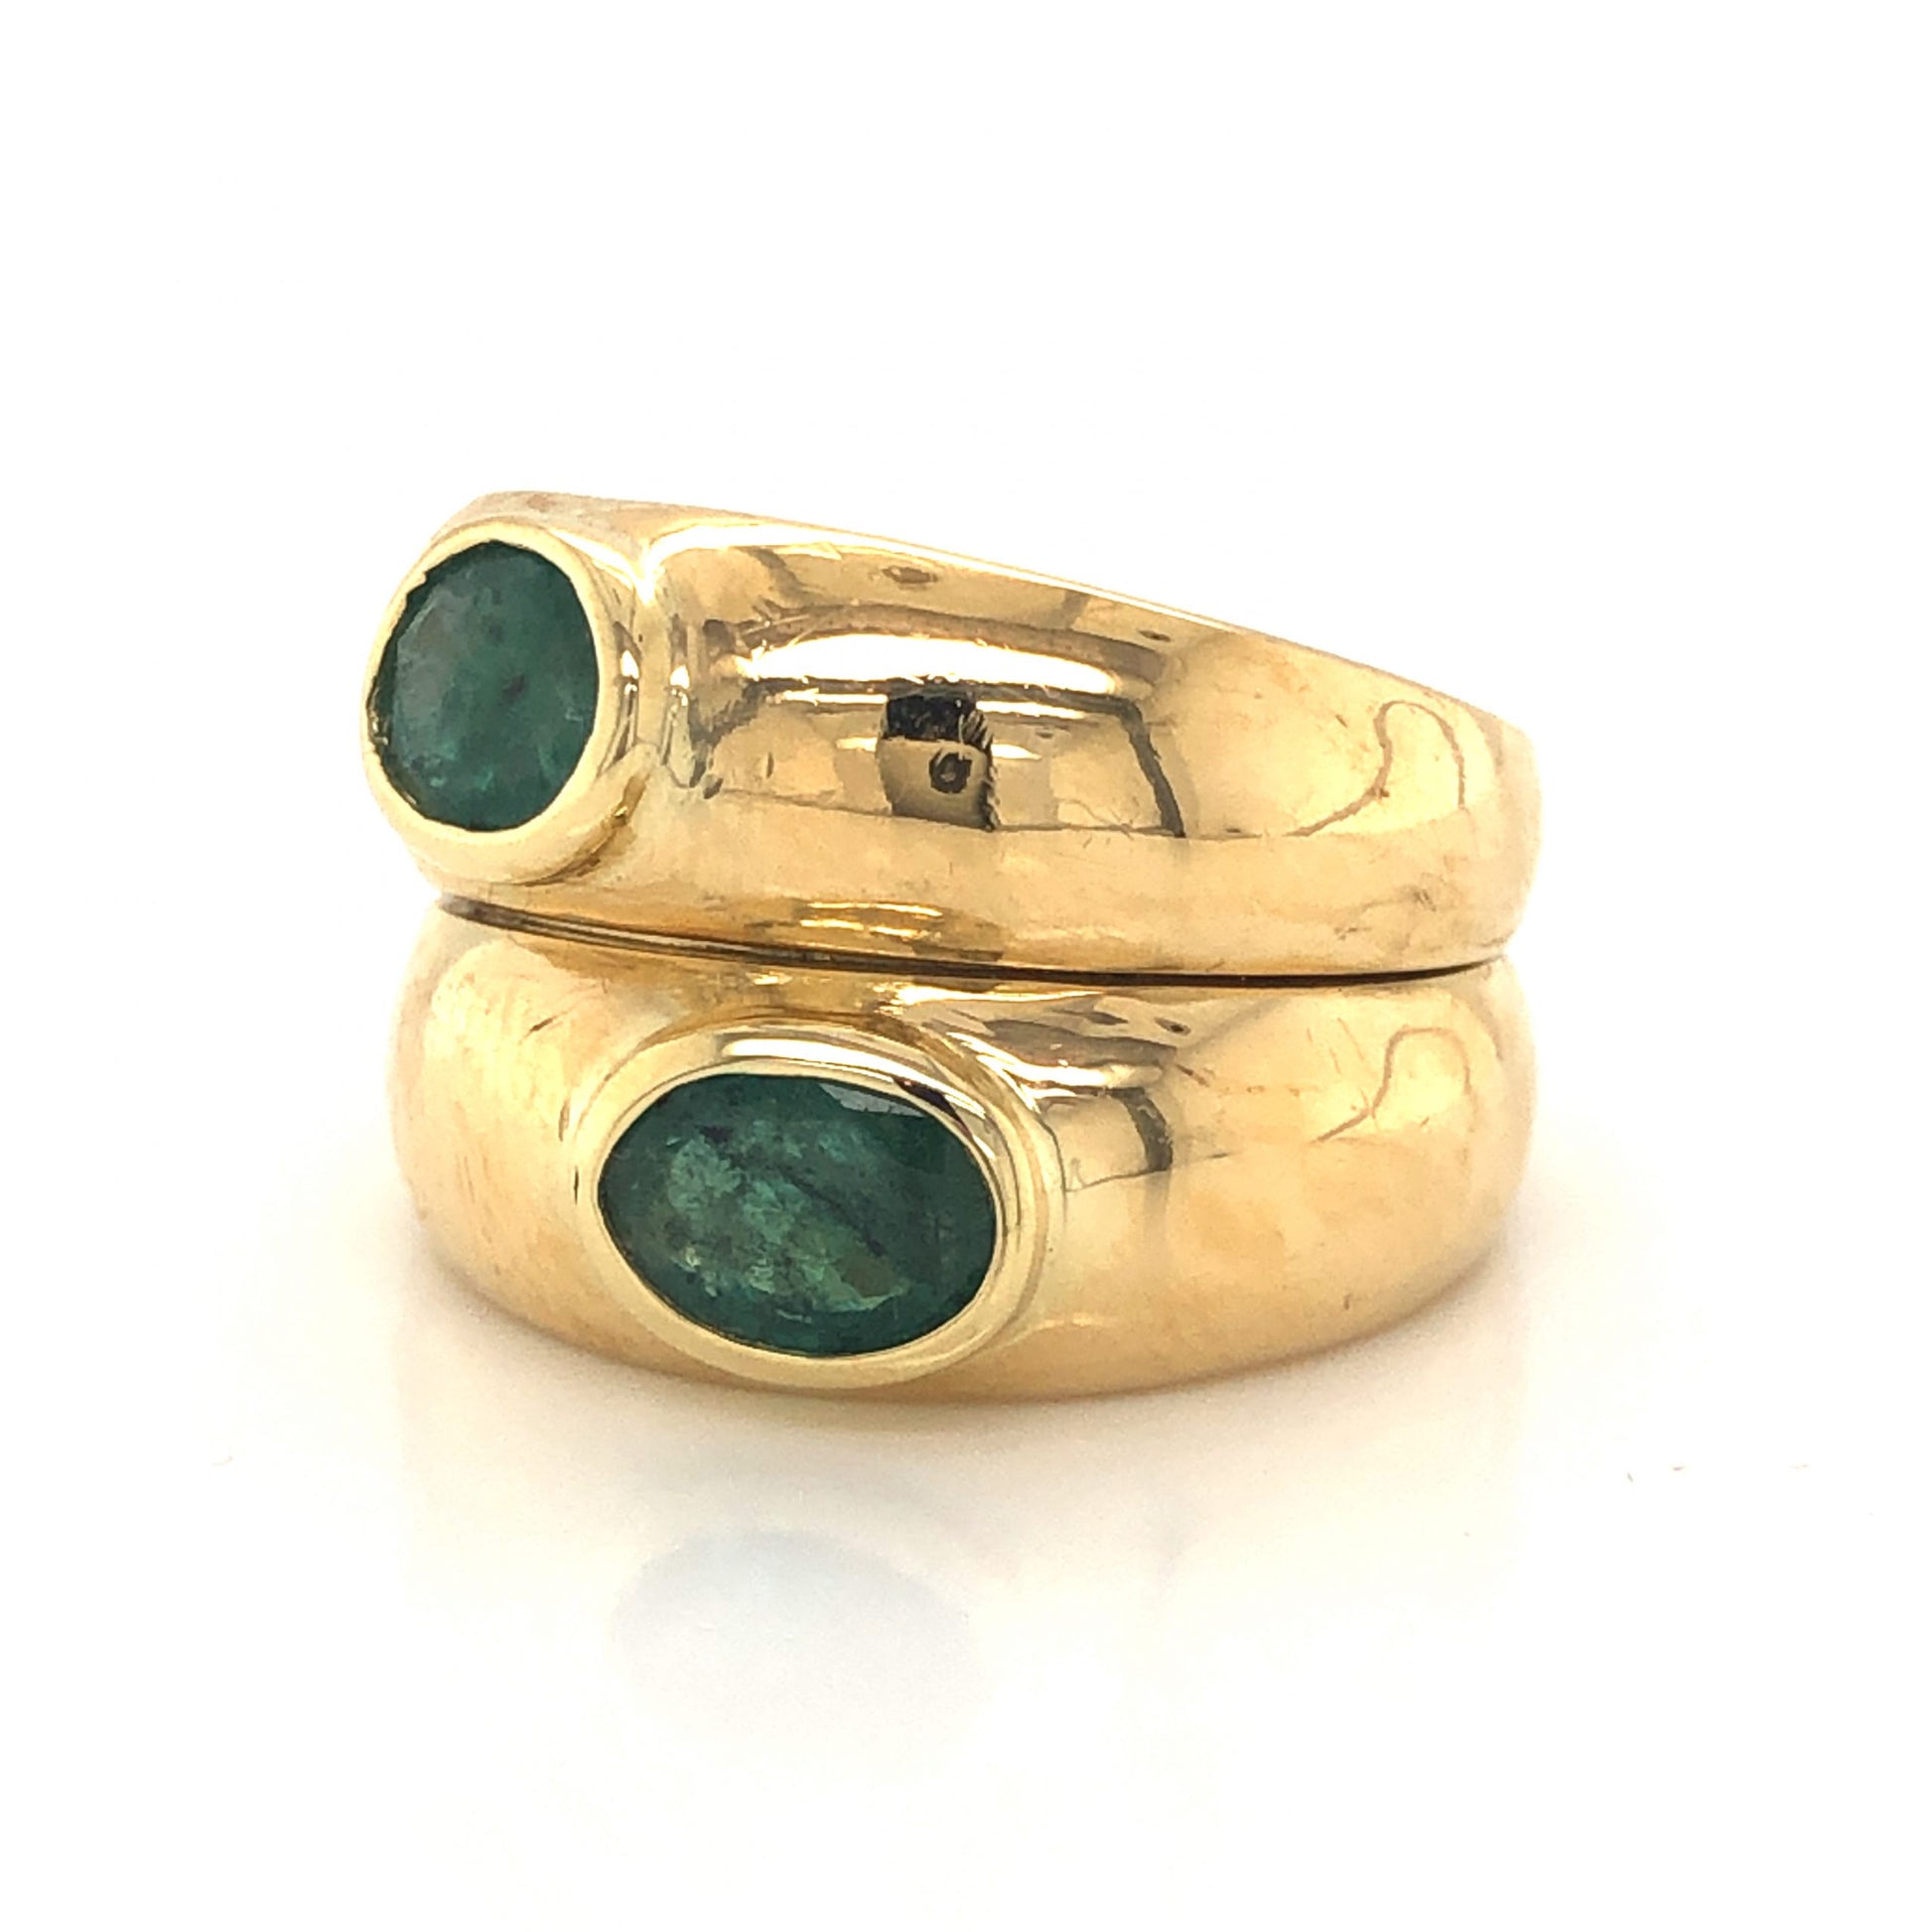 Stacked Oval Cut Emerald Cocktail Ring in 18k Yellow GoldComposition: 18 Karat Yellow GoldRing Size: 6Total Gram Weight: 8.6 gInscription: 750